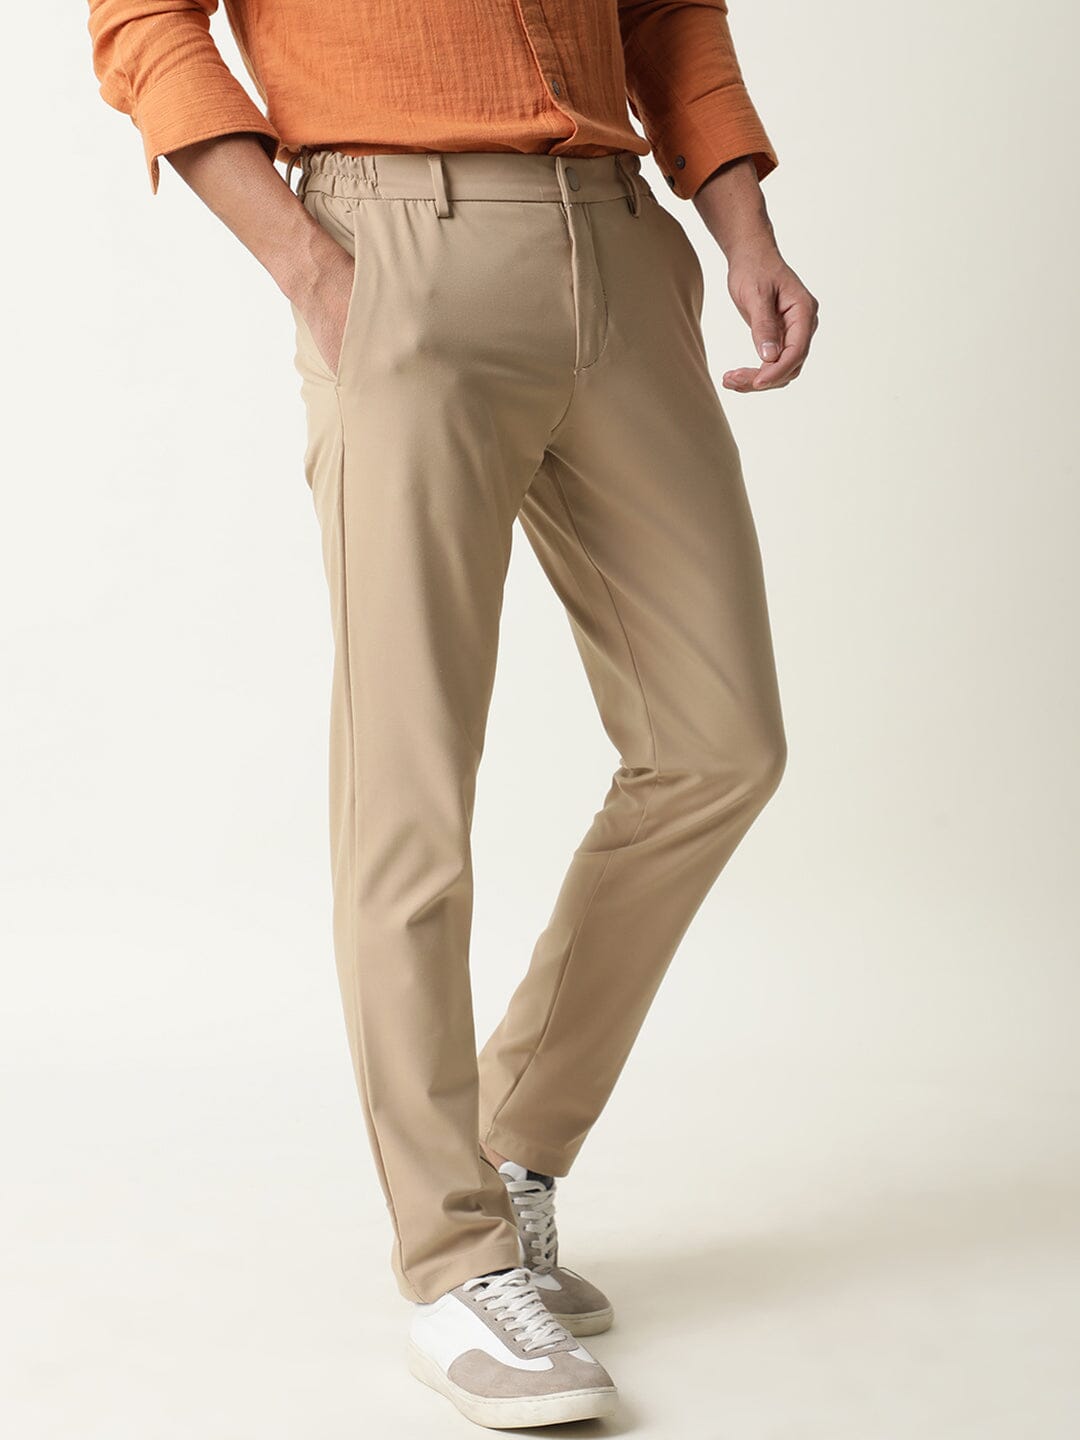 BKE Aiden Boot Stretch Pant - Men's Pants in Washed Khaki